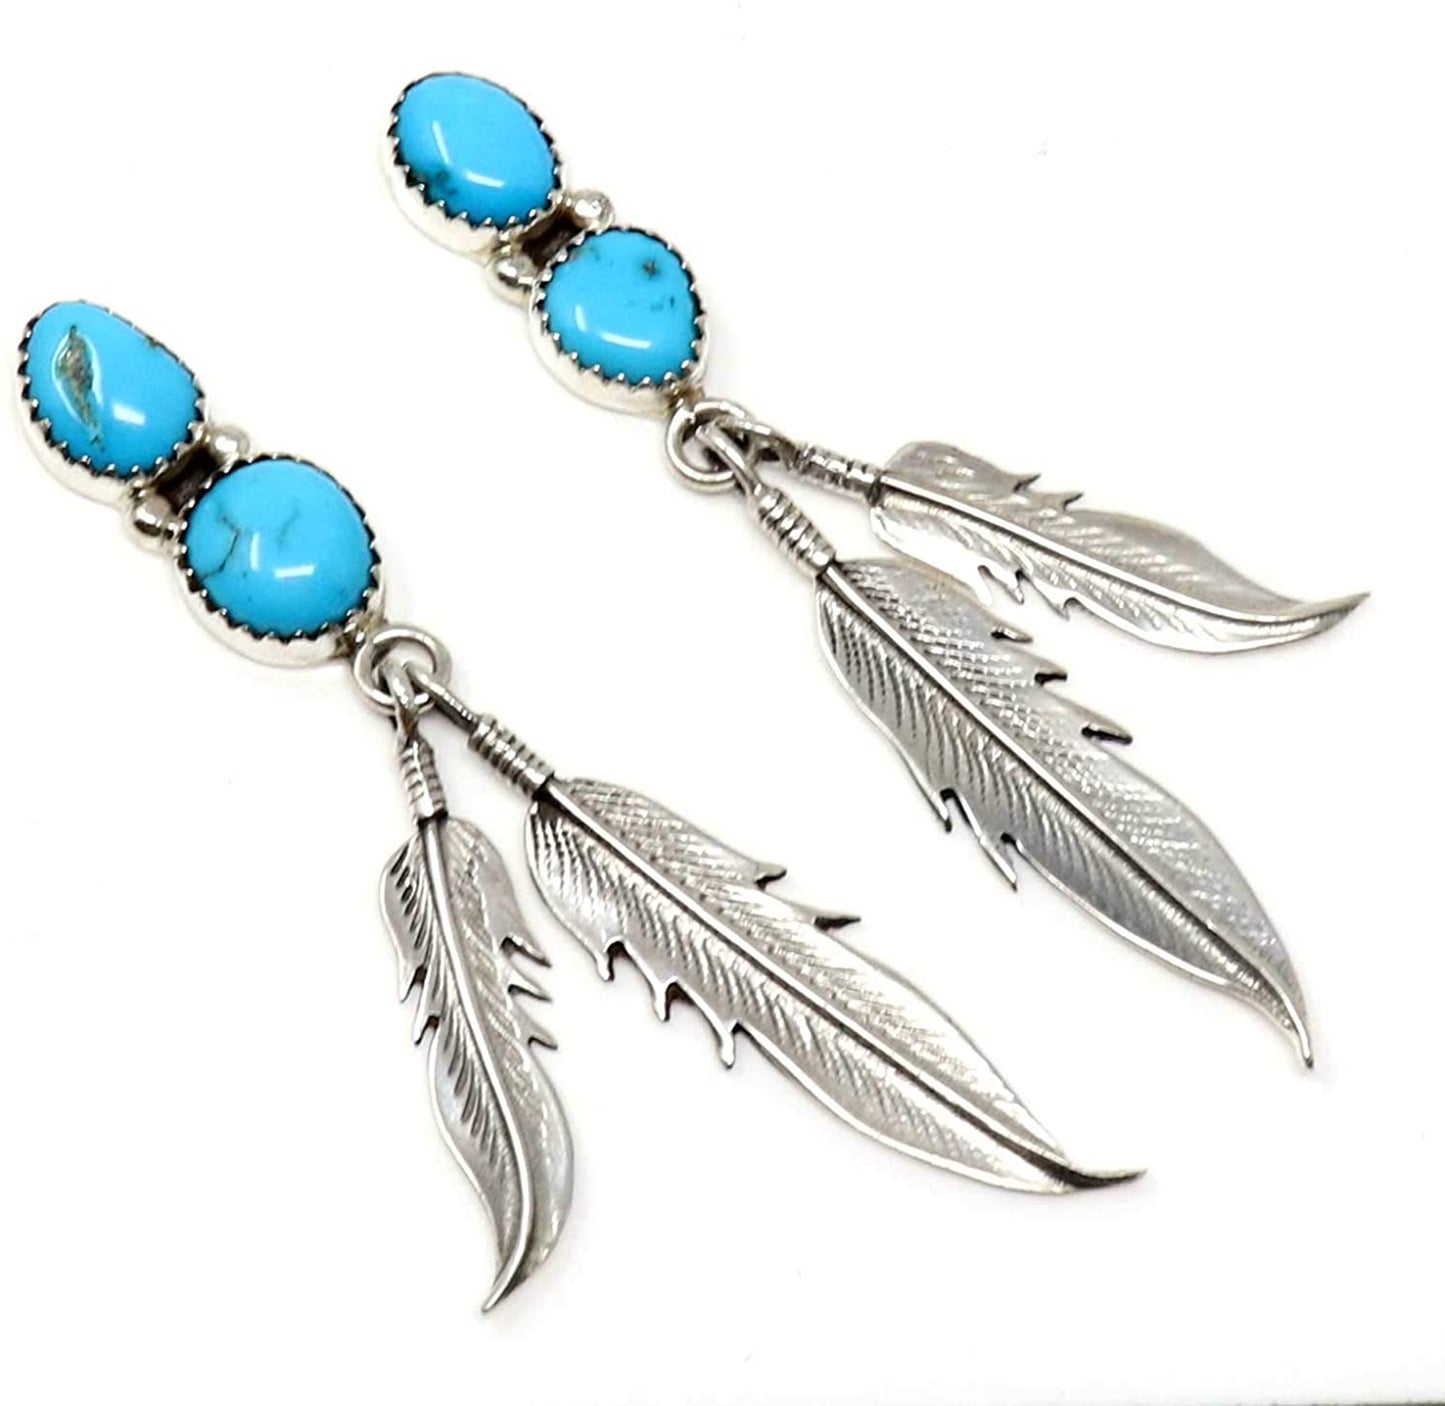 Load image into Gallery viewer, Two Stone Turquoise Dangle Earrings
